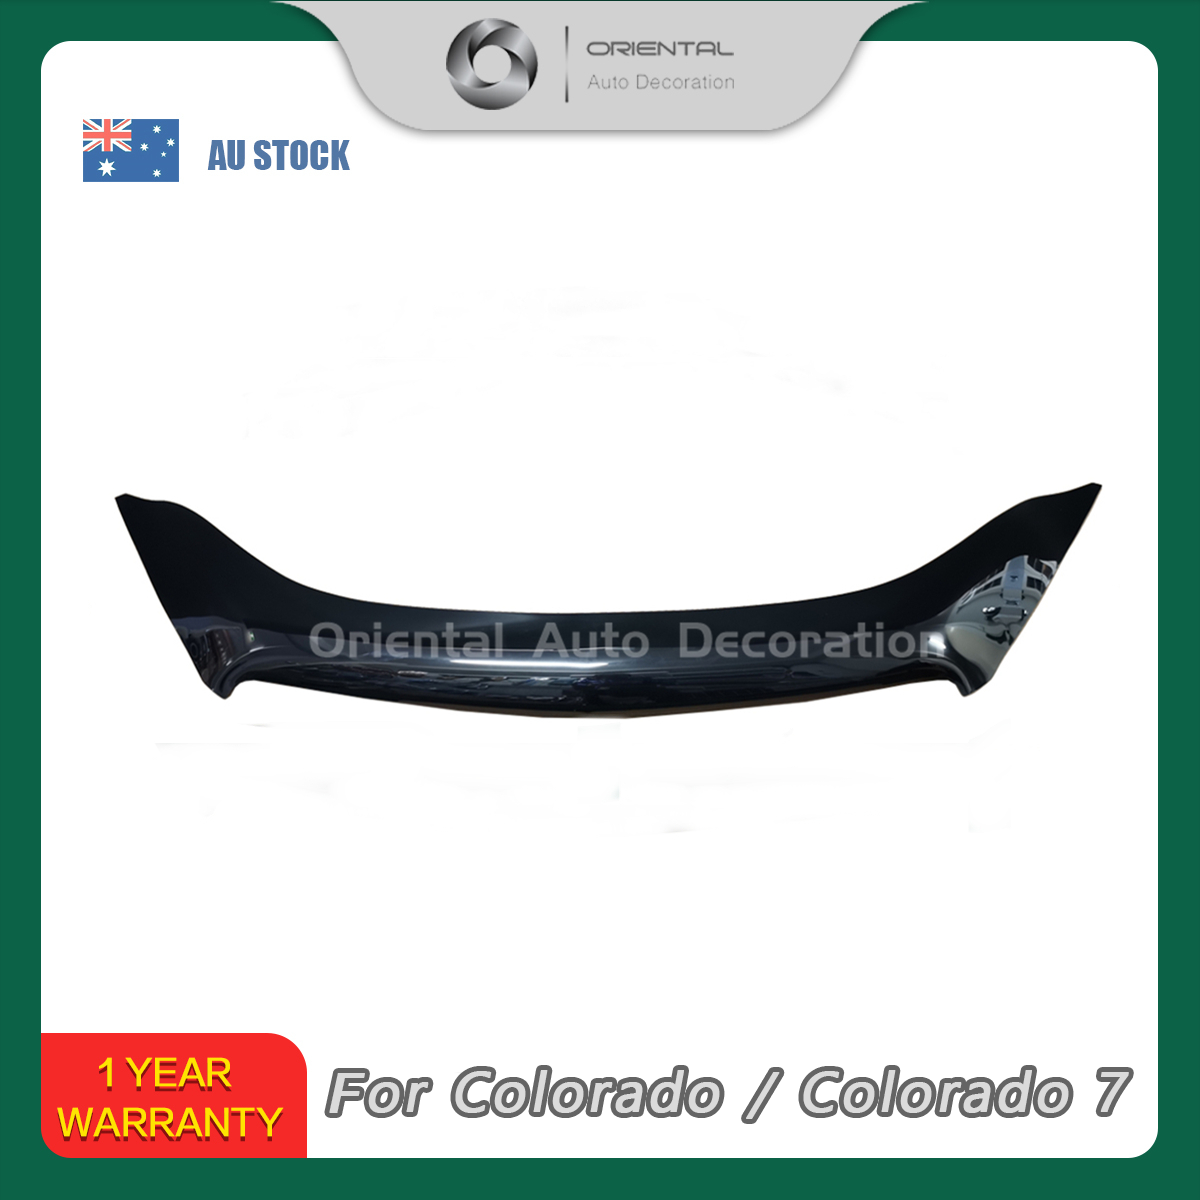 PICK UP ONLY!!! Bonnet Protector for Holden RG series Colorado / Colorado 7 12-16 model #BC